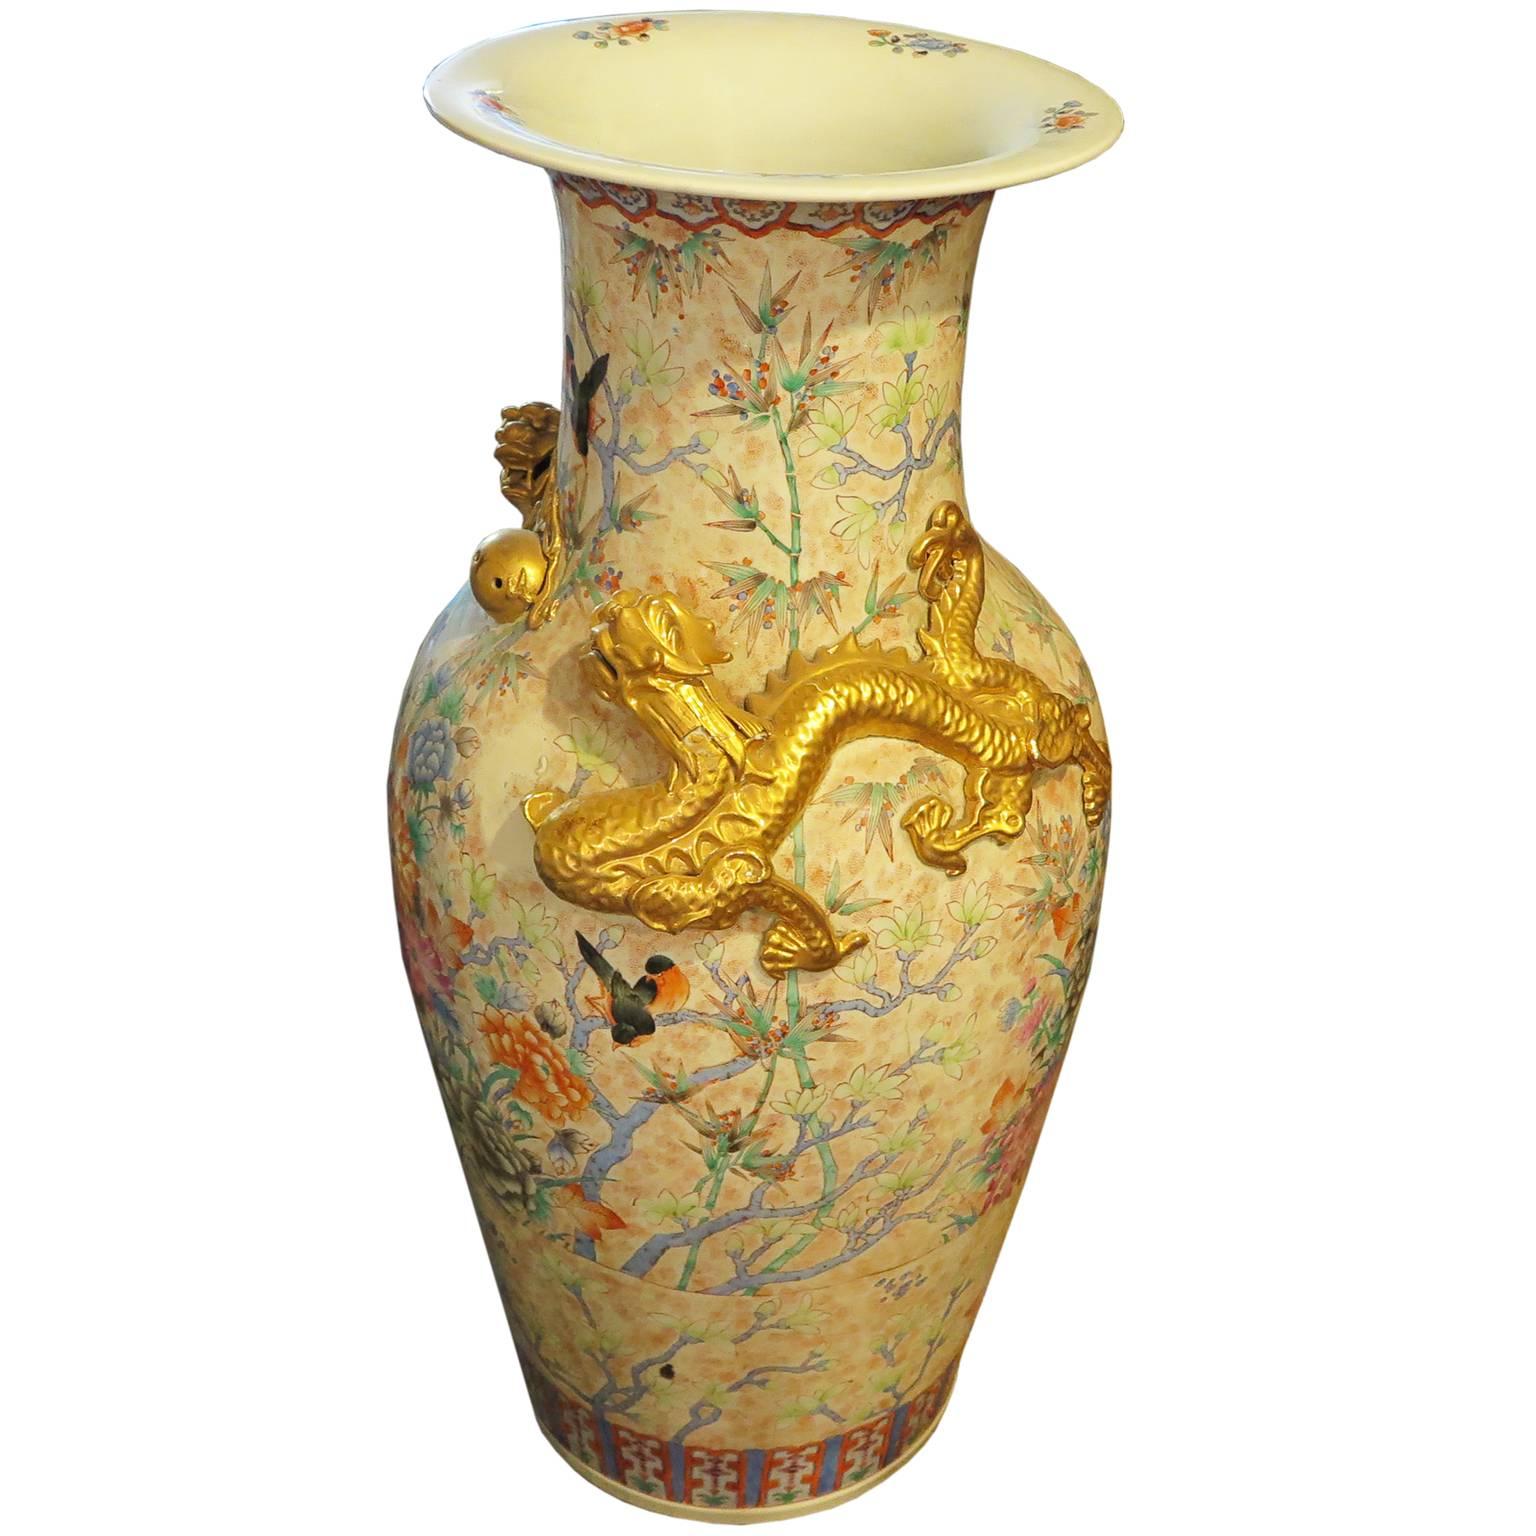 Extra large Cantonese porcelain urn vase from the late 19th century. The vase is hand-painted and depicts scenes of flowers and birds in a nature motif. The sides of the vase are adorned with two golden dragons.
 